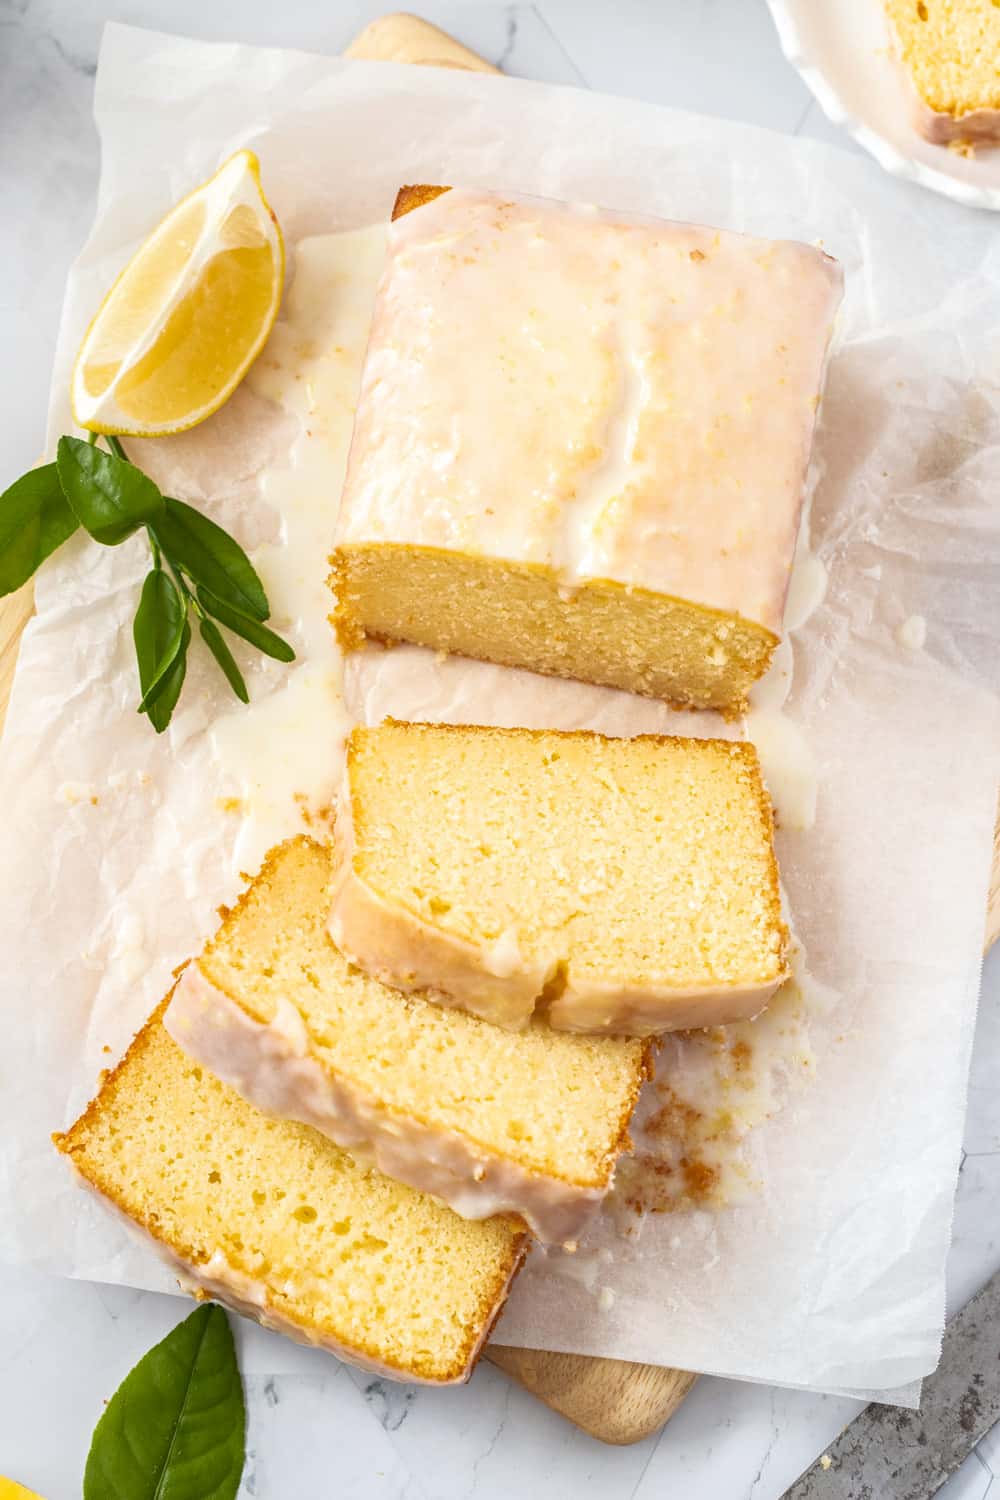 Birdseye view of a glazed cake on a sheet of baking paper. - Cream Cheese Pound Cake